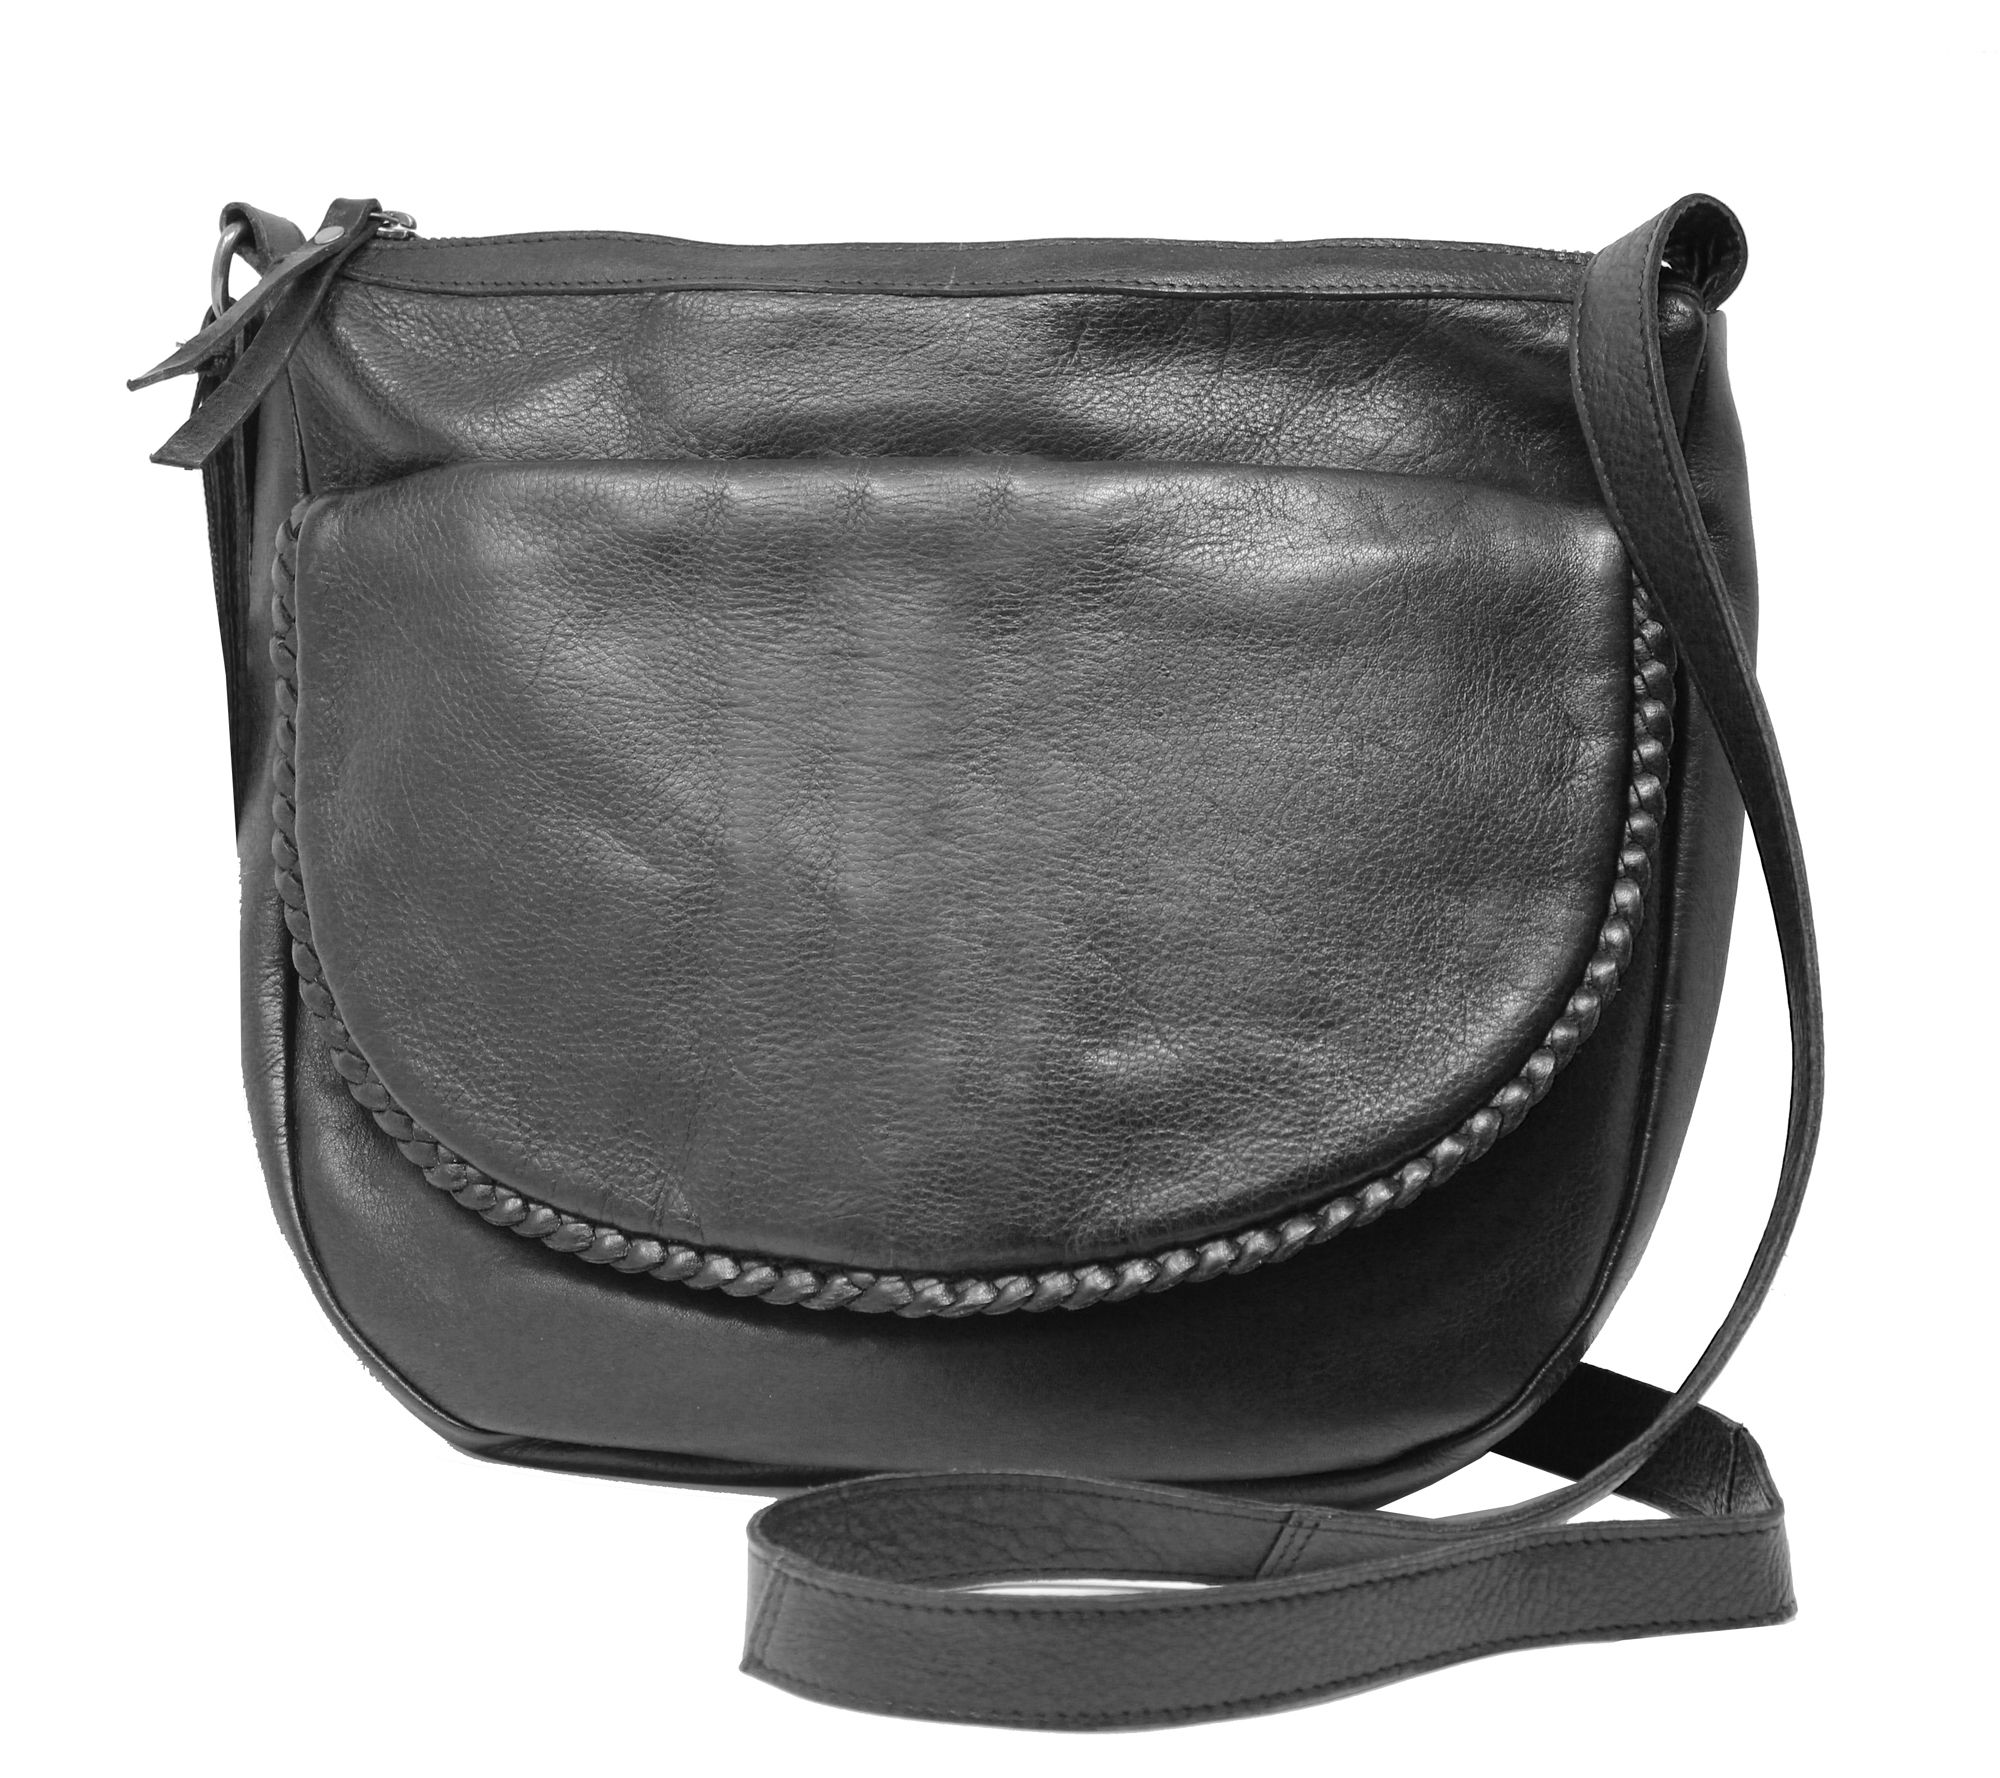 Latico Leathers Atelier Collection Flap Front Bag - Becca - QVC.com